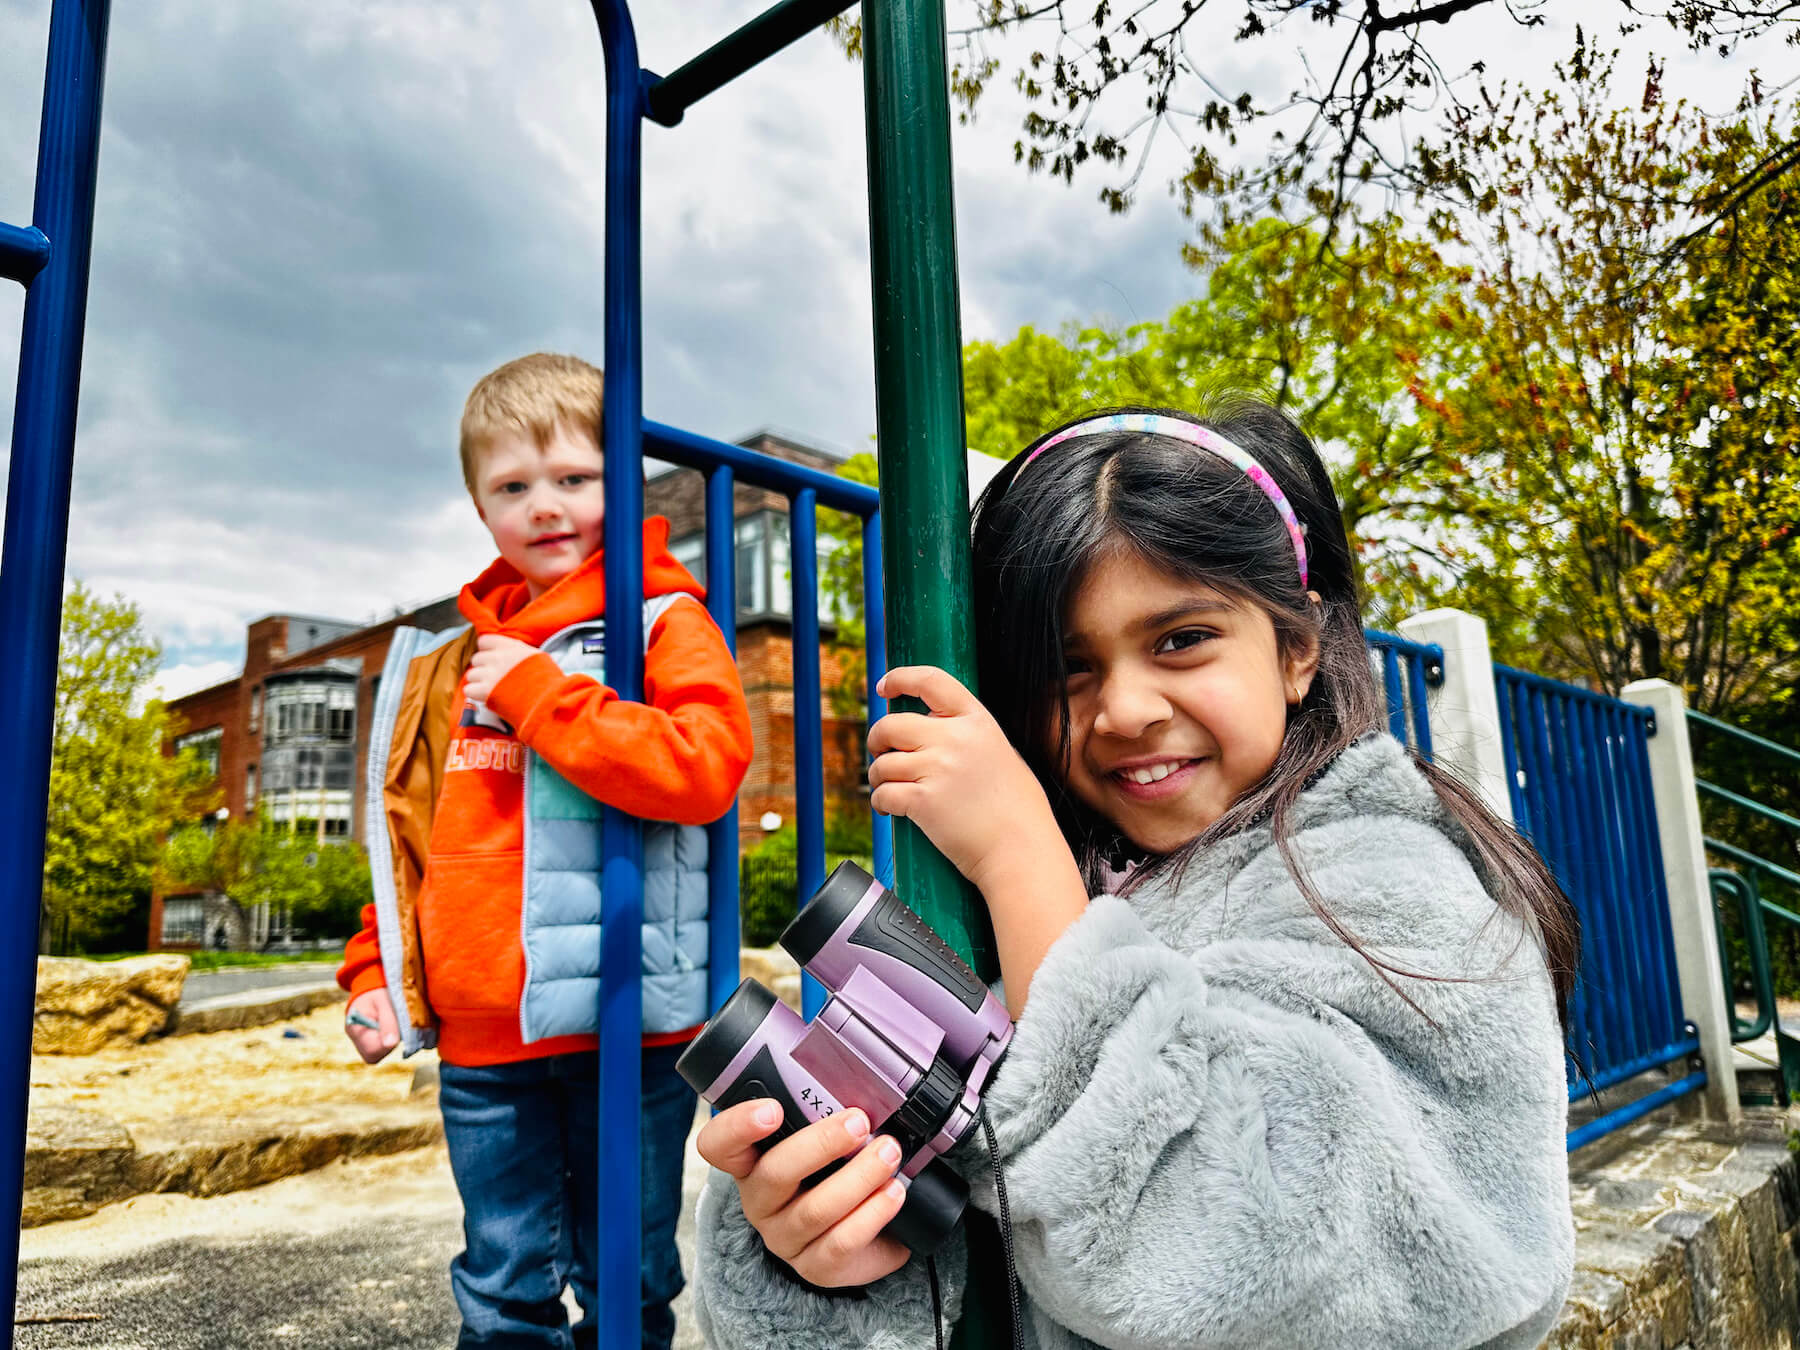 Ethical Culture Fieldston School Fieldston Lower students smile at camera while playing on playground